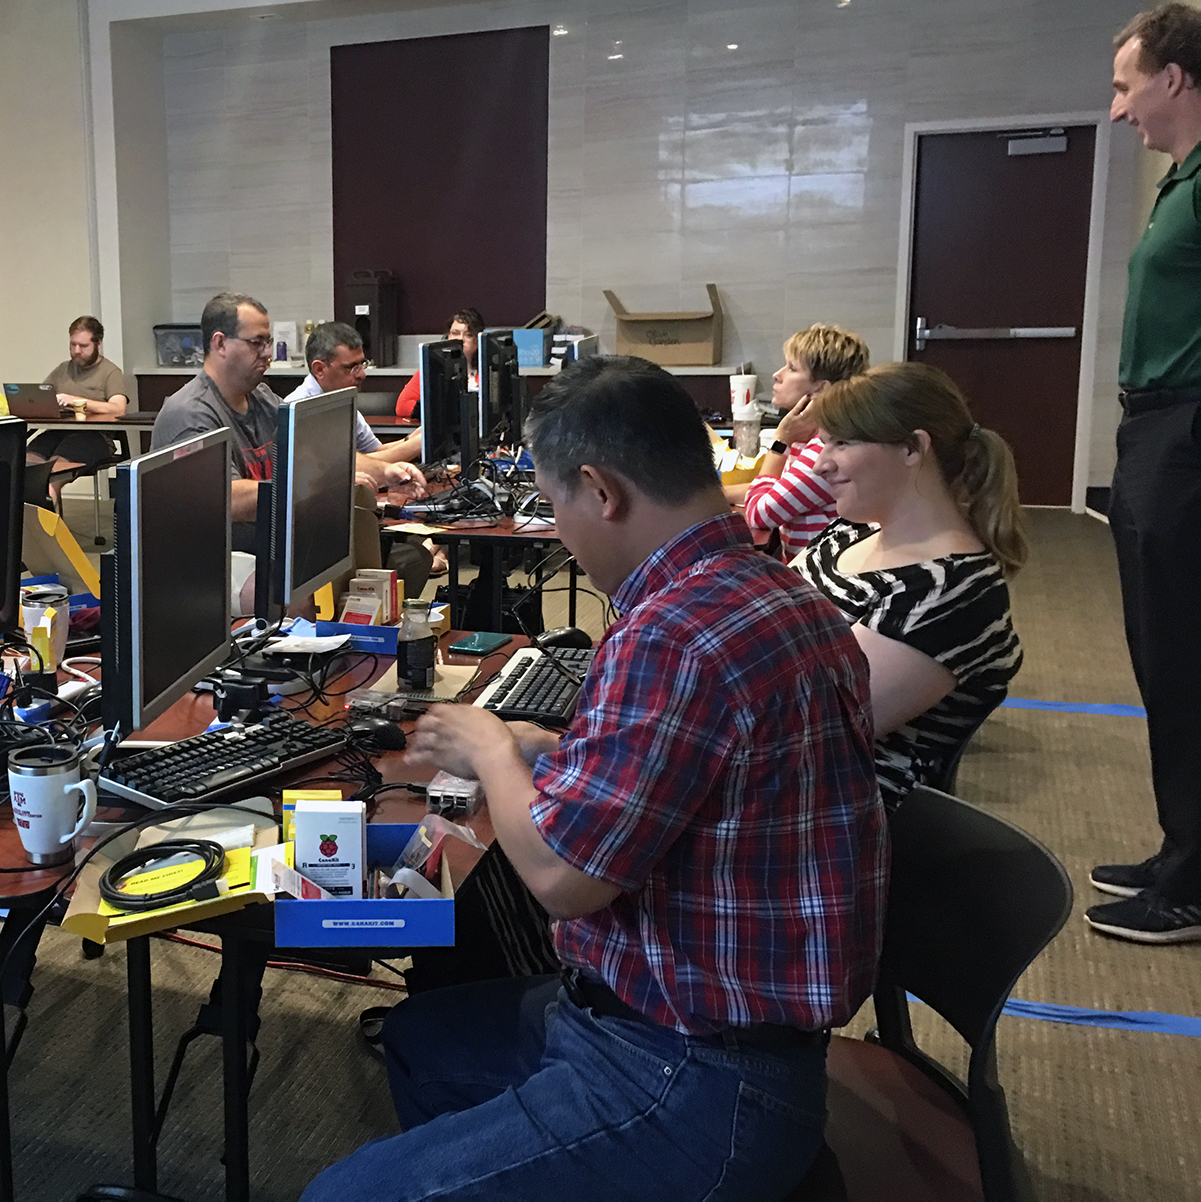 Teachers building Raspberry Pis in an onsite Texas A&M cybersecurity summer camp